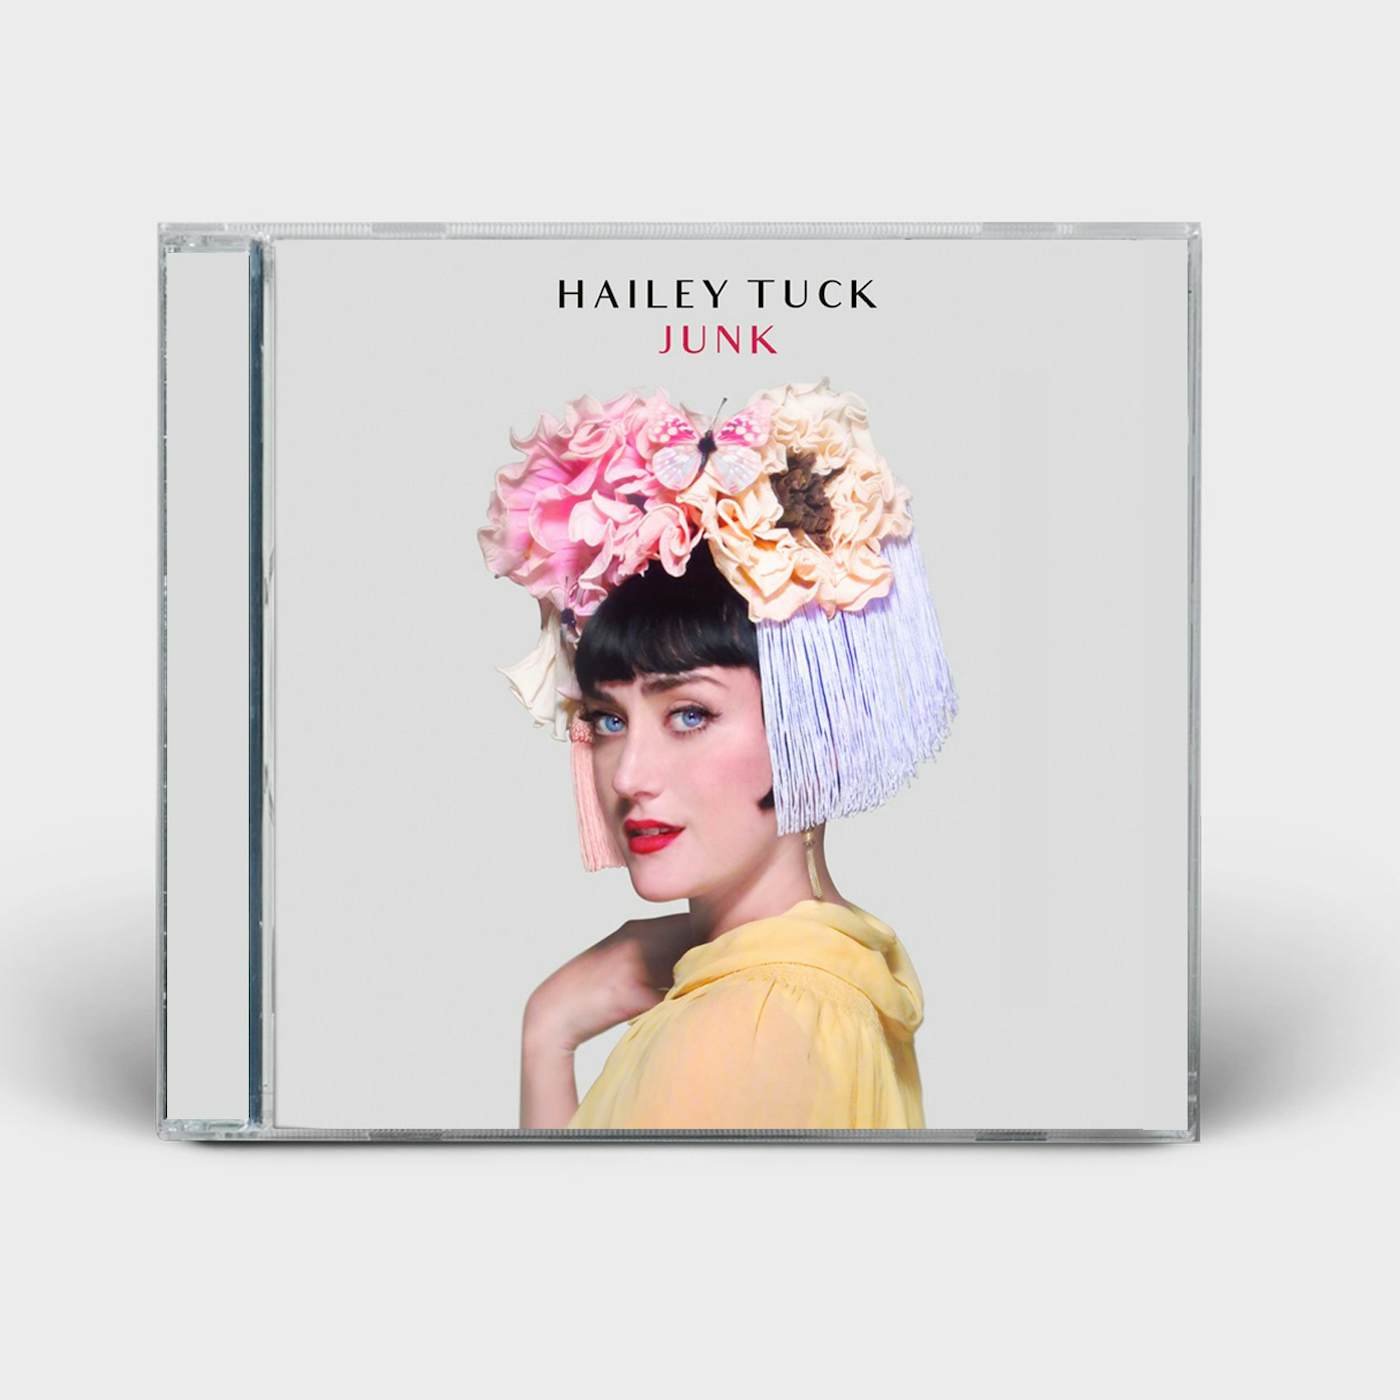 Hailey Tuck JUNK - SIGNED CD